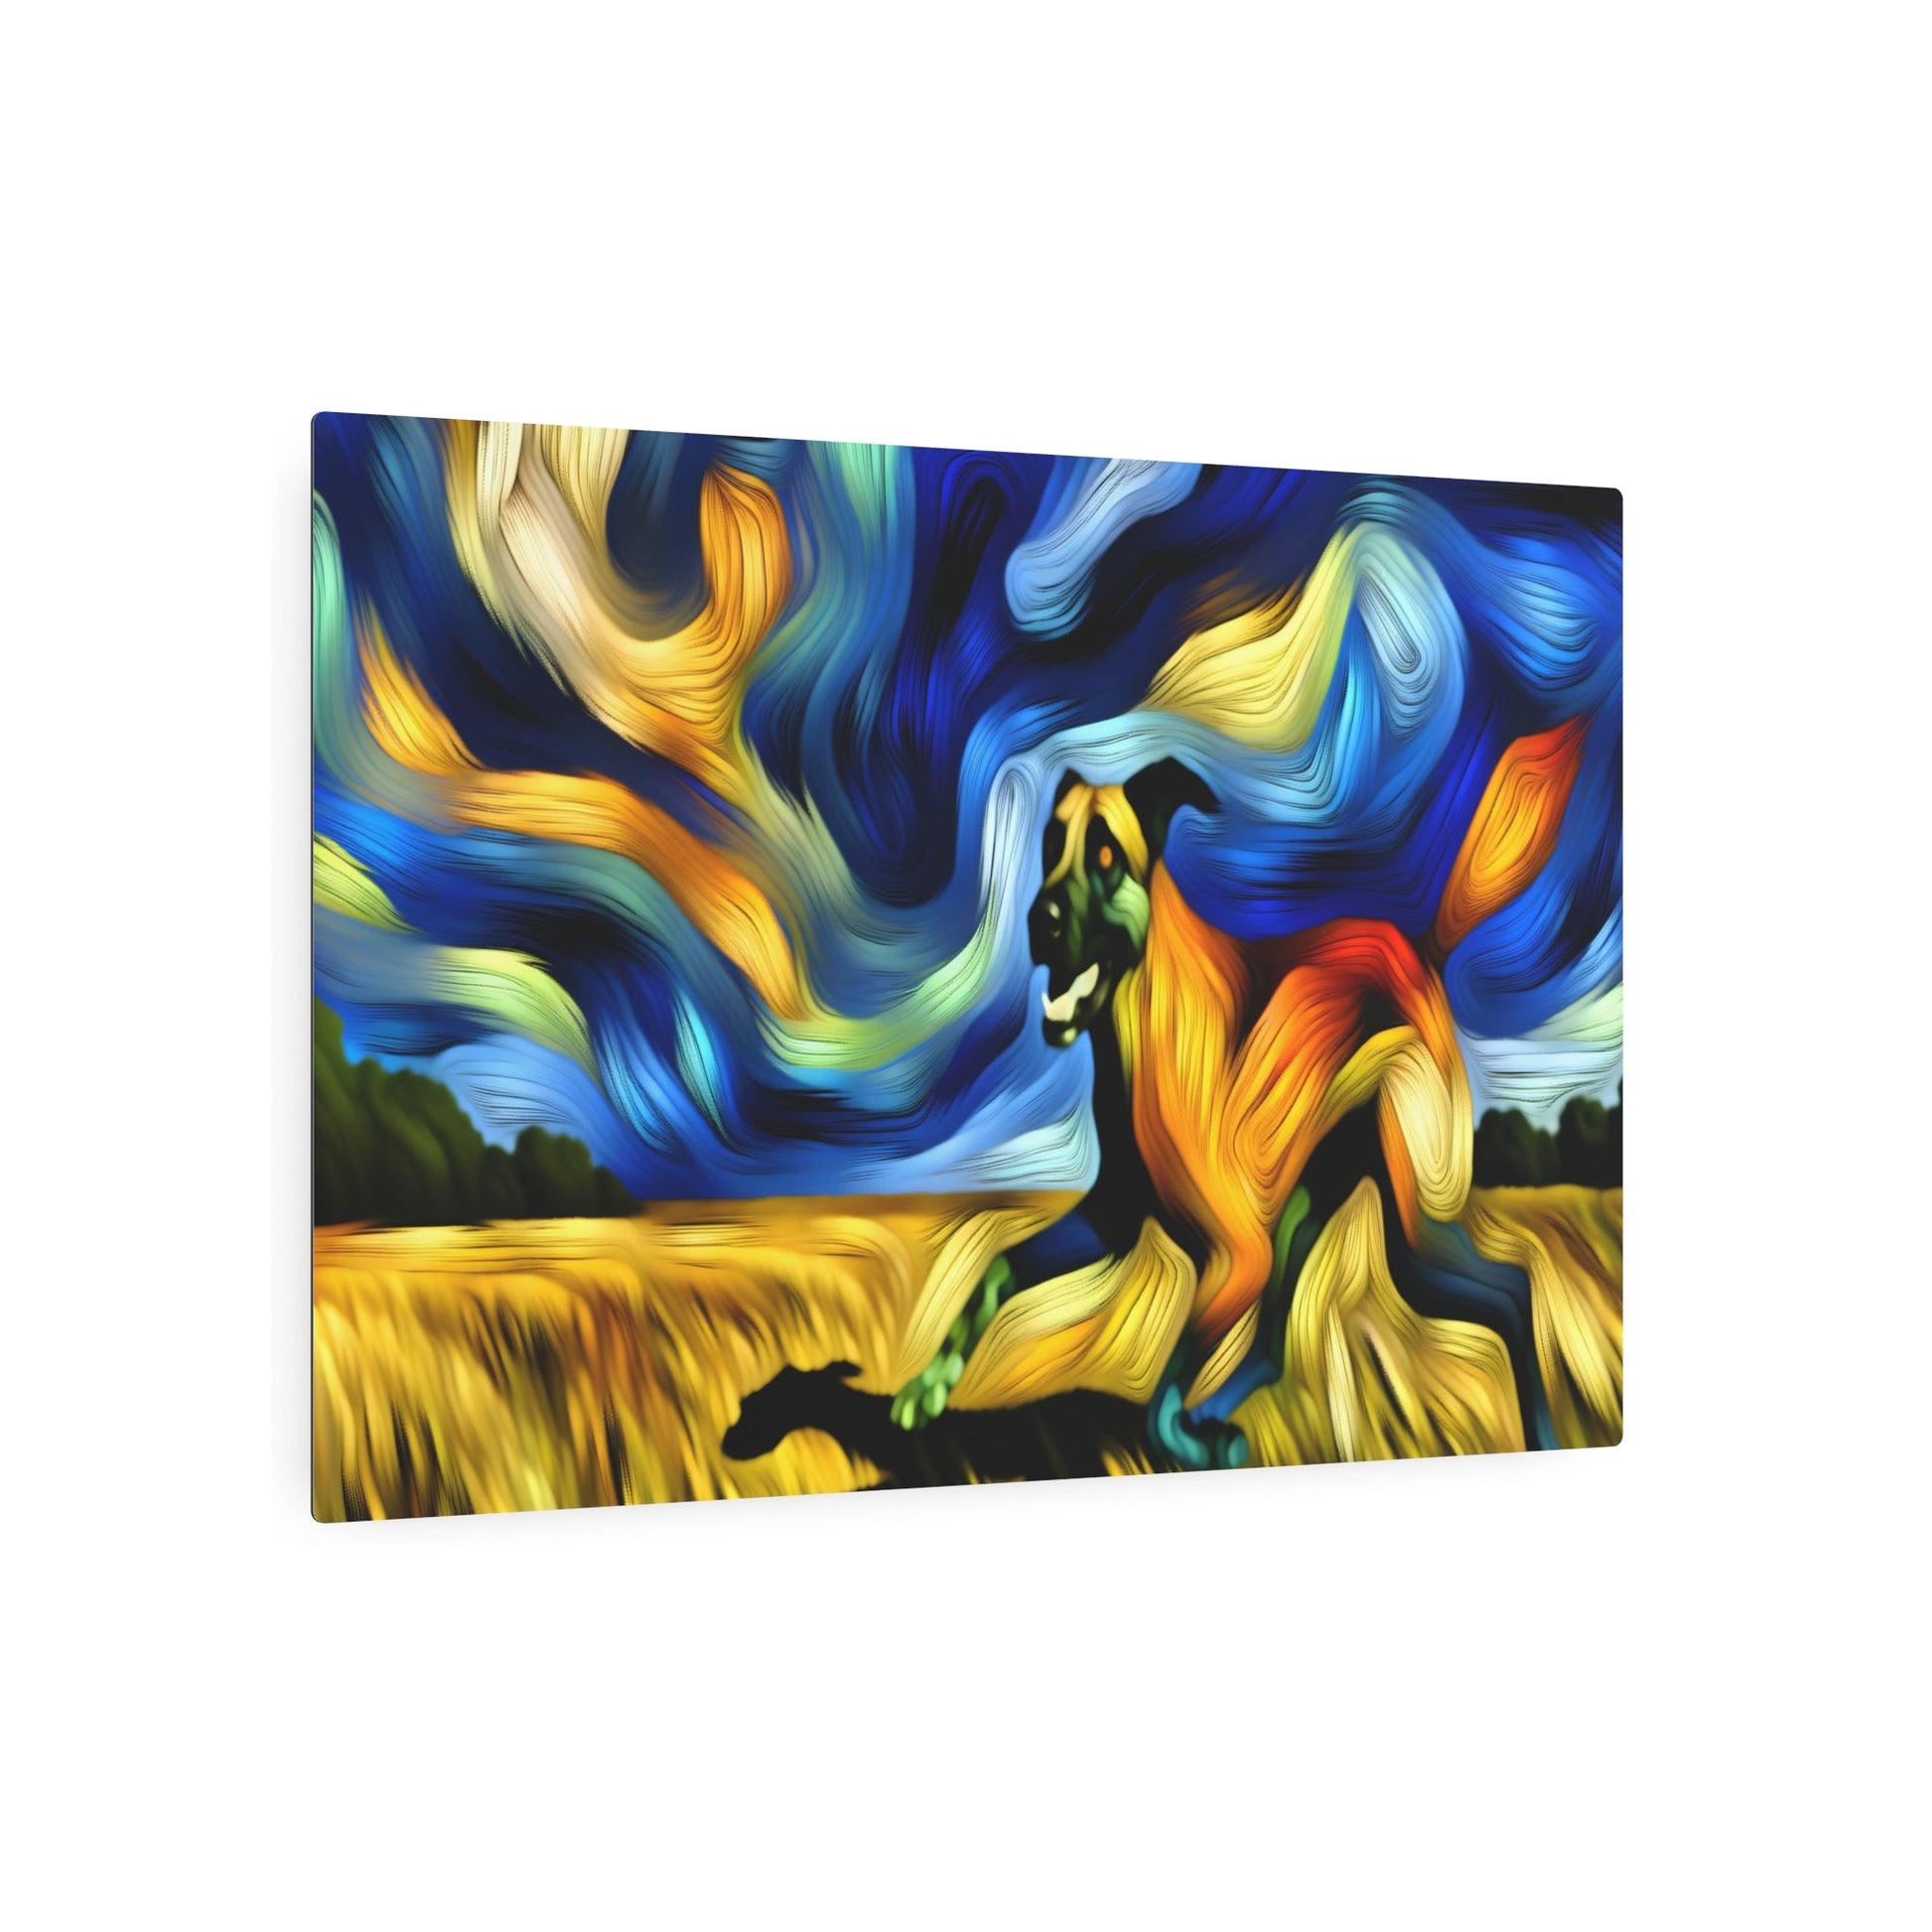 Metal Poster Art | "Expressionistic Western Art Style: Intense Colored Large Expressive Dog Running Through Field Under Swirling Blue and Yellow Skies" - Metal Poster Art 36″ x 24″ (Horizontal) 0.12''